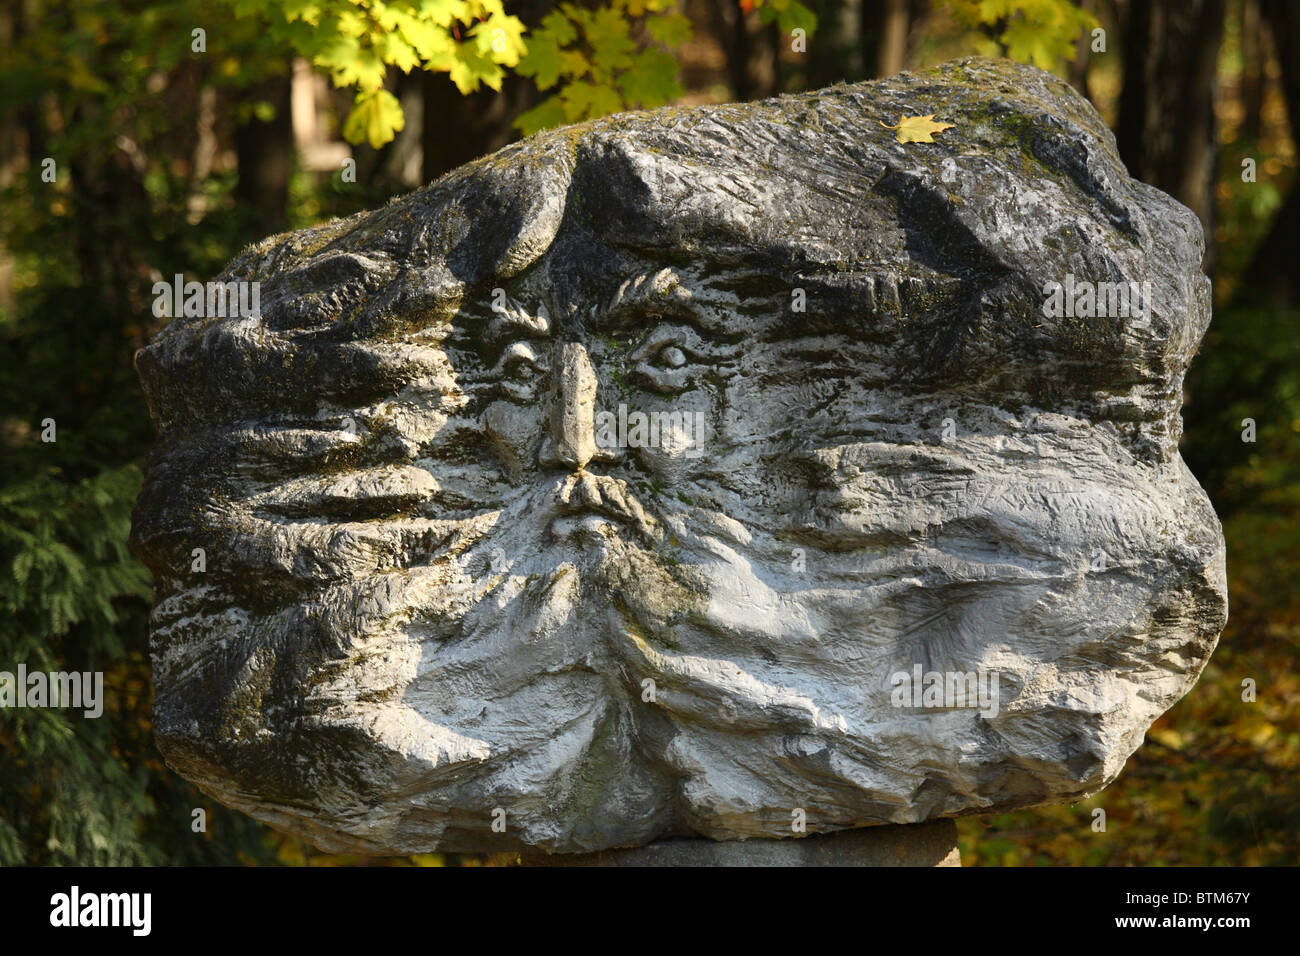 Sculpture in the park (WPKiW, Chorzow, Poland) 'Silesian Culture and Recreation Park' Stock Photo